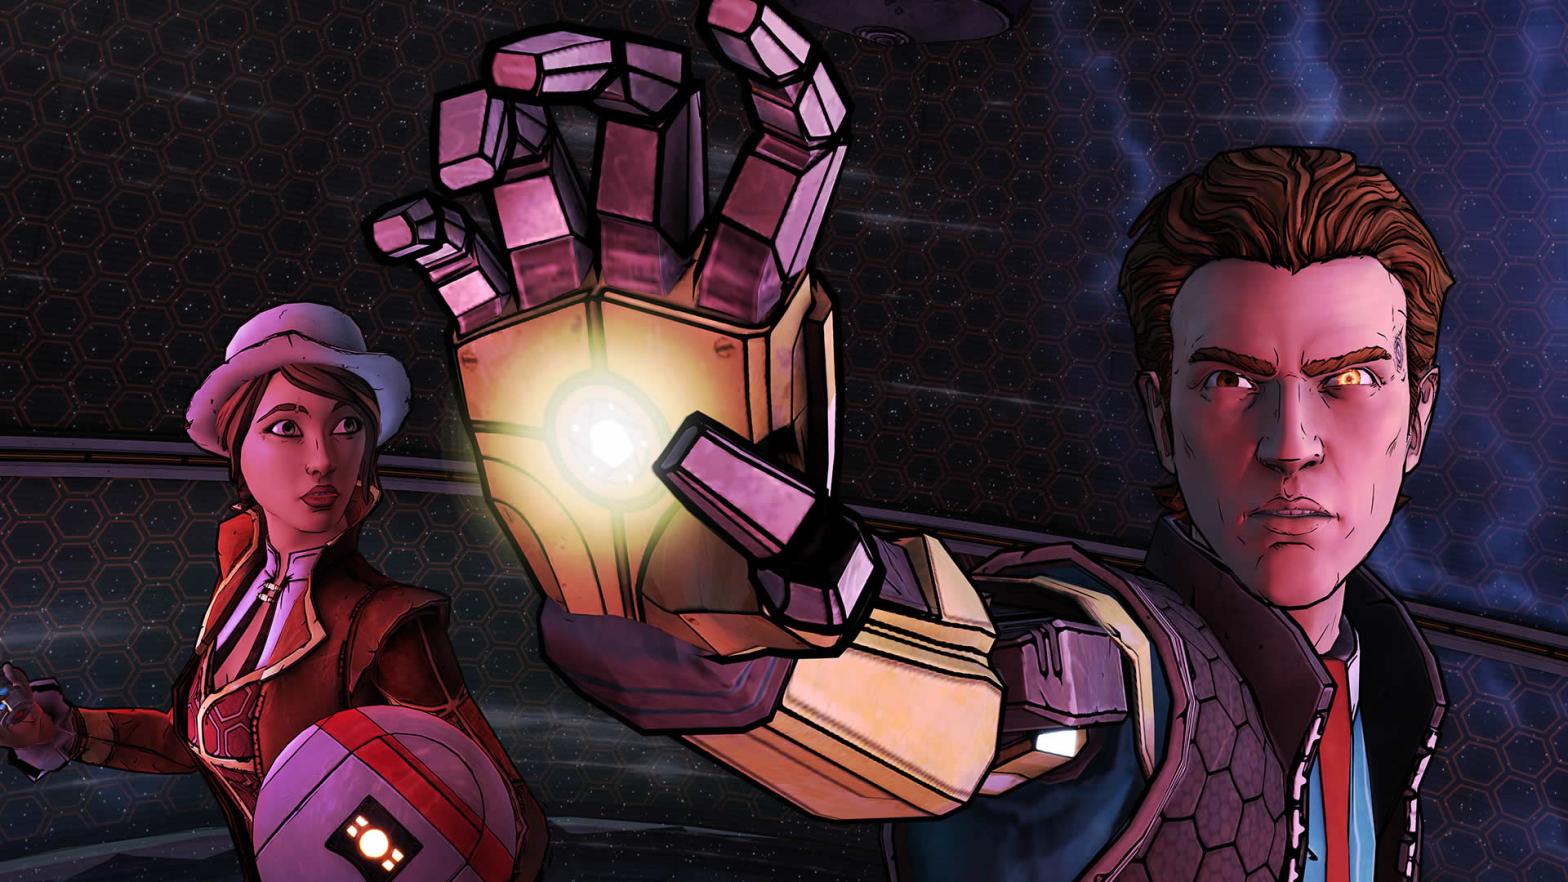 Tales protagonist Rhys (right) eventually appeared in Borderlands 3, but co-star Fiona is still MIA. (Screenshot: Telltale Games / Gearbox)